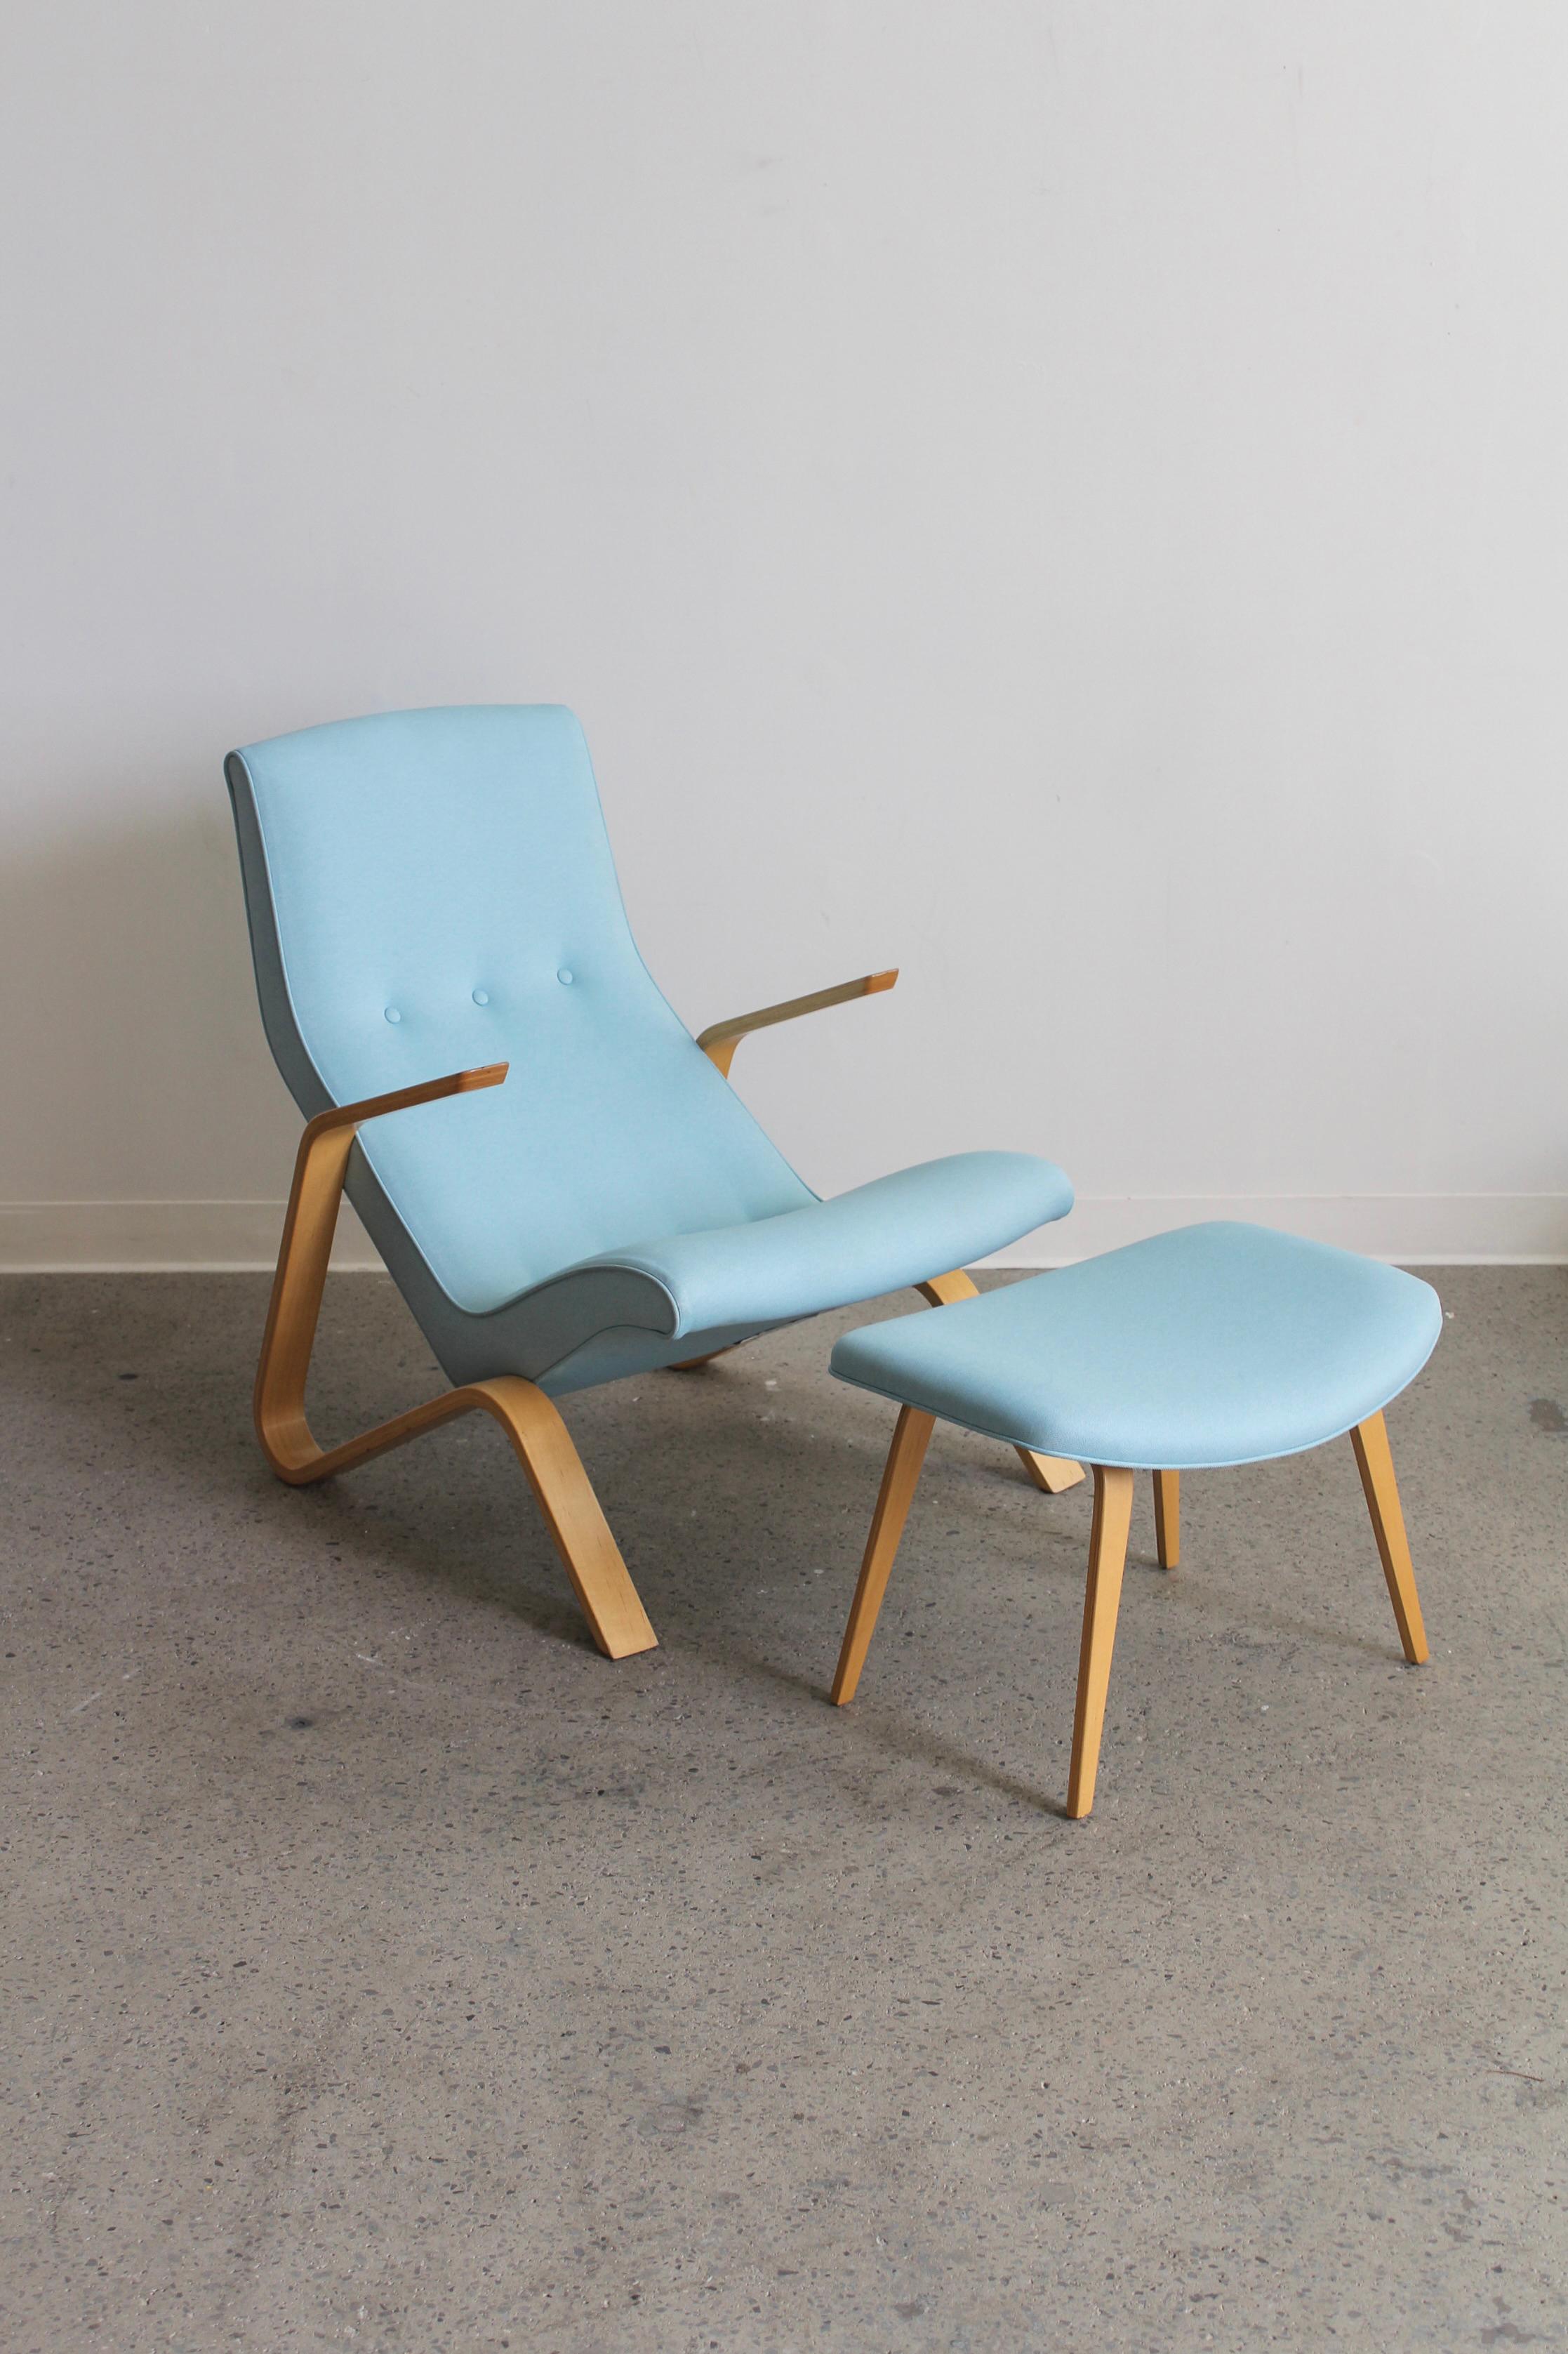 Grasshopper chair and ottoman by Eero Saarinen for Modernica, 2000s. Bentwood arms and legs with a sky blue coloured cotton upholstery.

In great vintage condition, small imperfection on back of chair as per photo.

Dimensions: Lounge Chair: 34